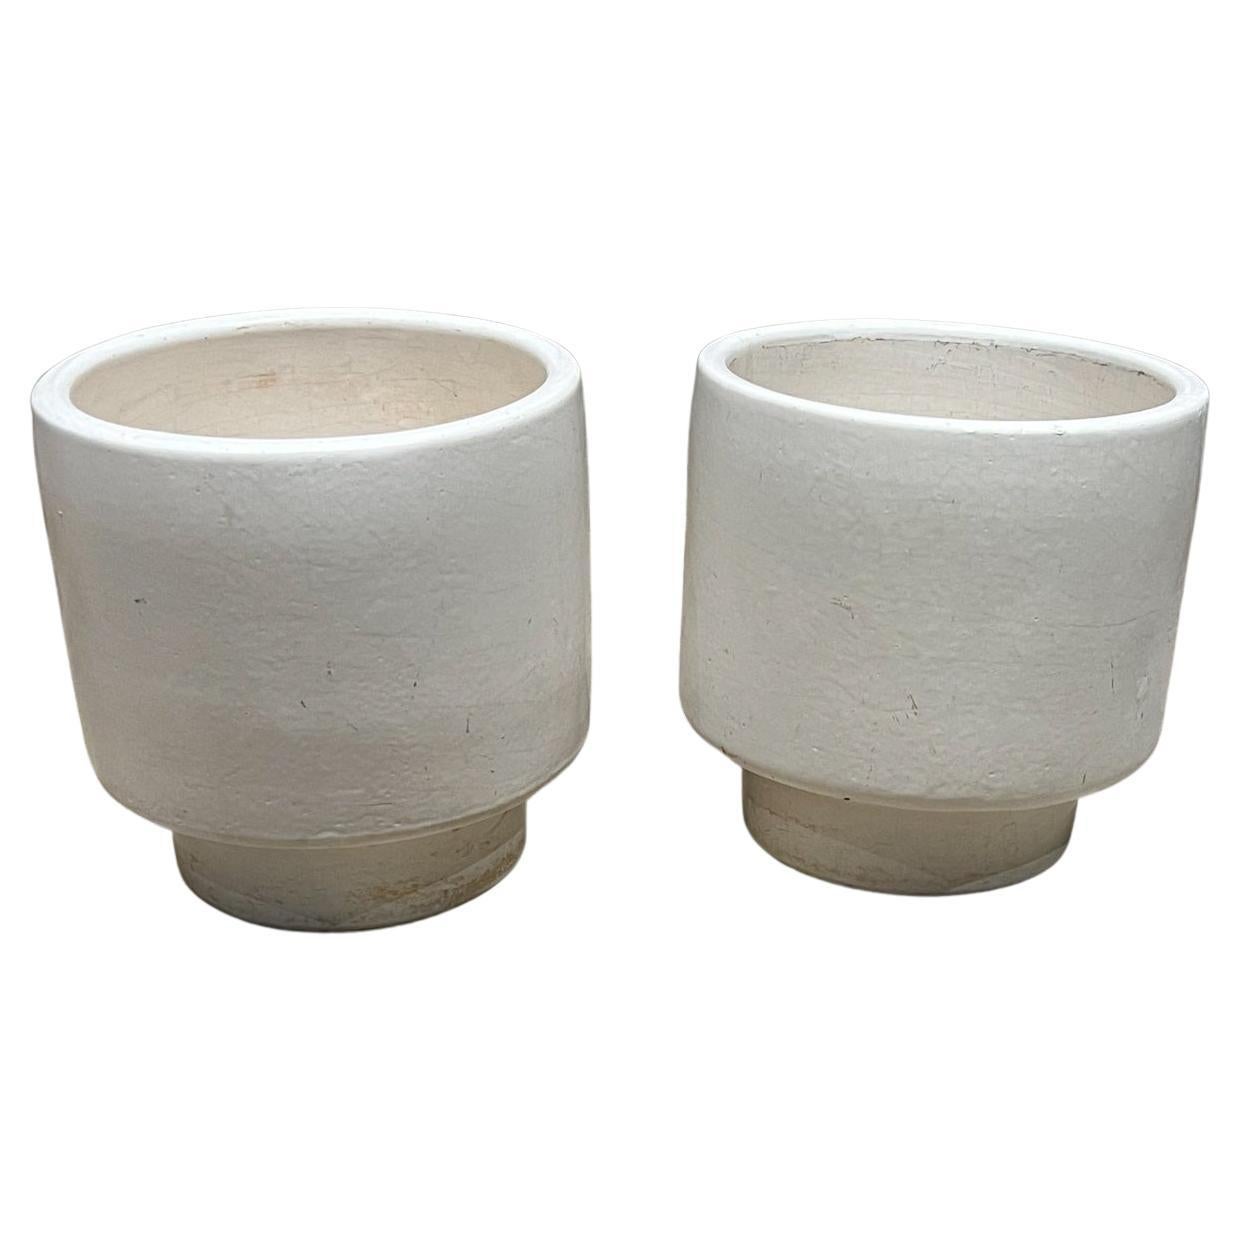 1960s California ceramic Architectural pottery planter pair of white pots Footed attributed to style of Lagardo Tackett 
Signed maker on bottom, hard to read.
Measures: 8.75 tall x 8.25 diameter
Preowned unrestored original vintage